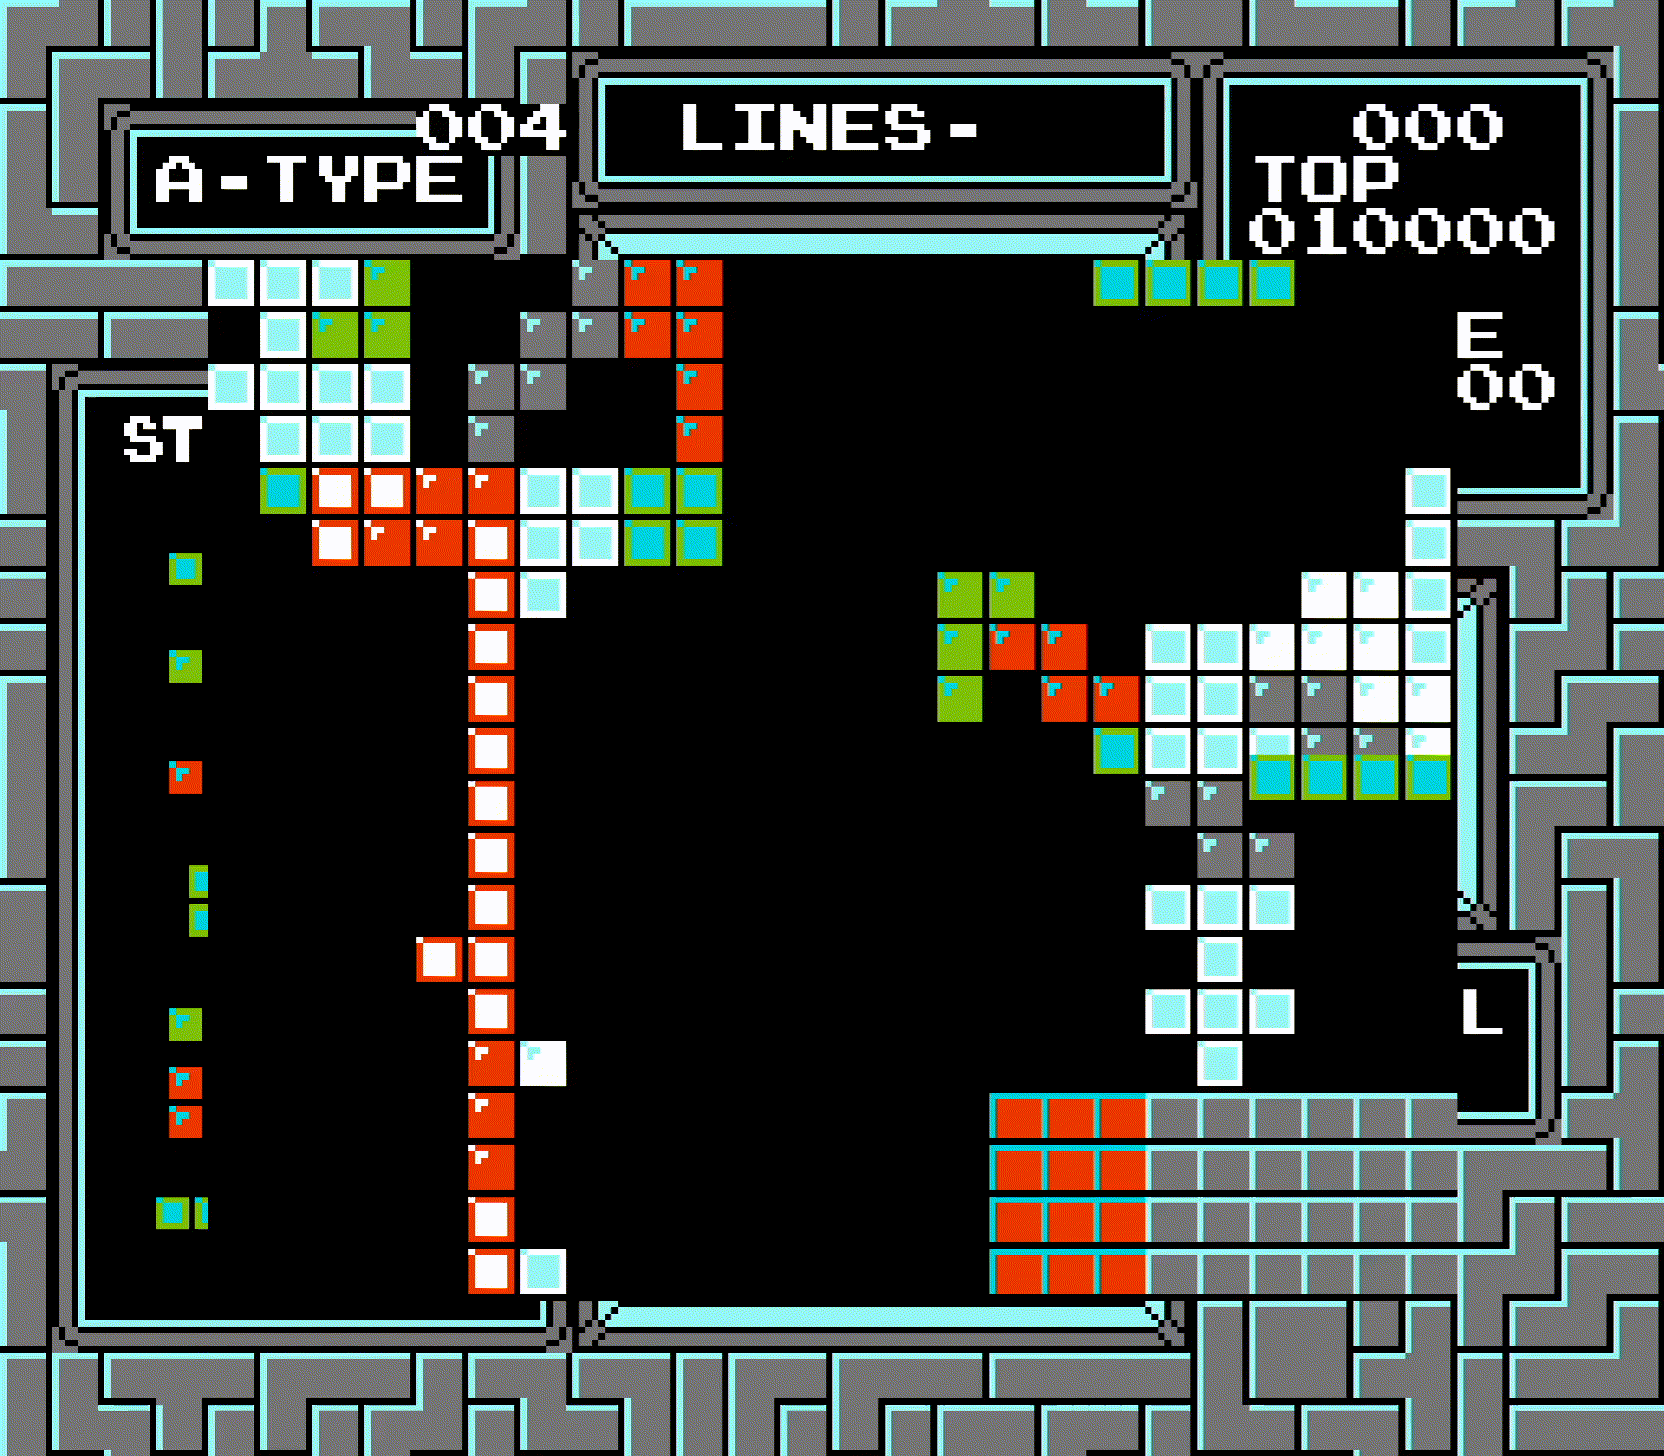 Player 1 clears the very top row, which results in some tiles overflowing onto the top row of player 2's board. This time, player 2 clears a row before the tiles appear, causing them to first appear on the 1st row (second row down) of player 2's board, then quickly get pushed up to the very top.